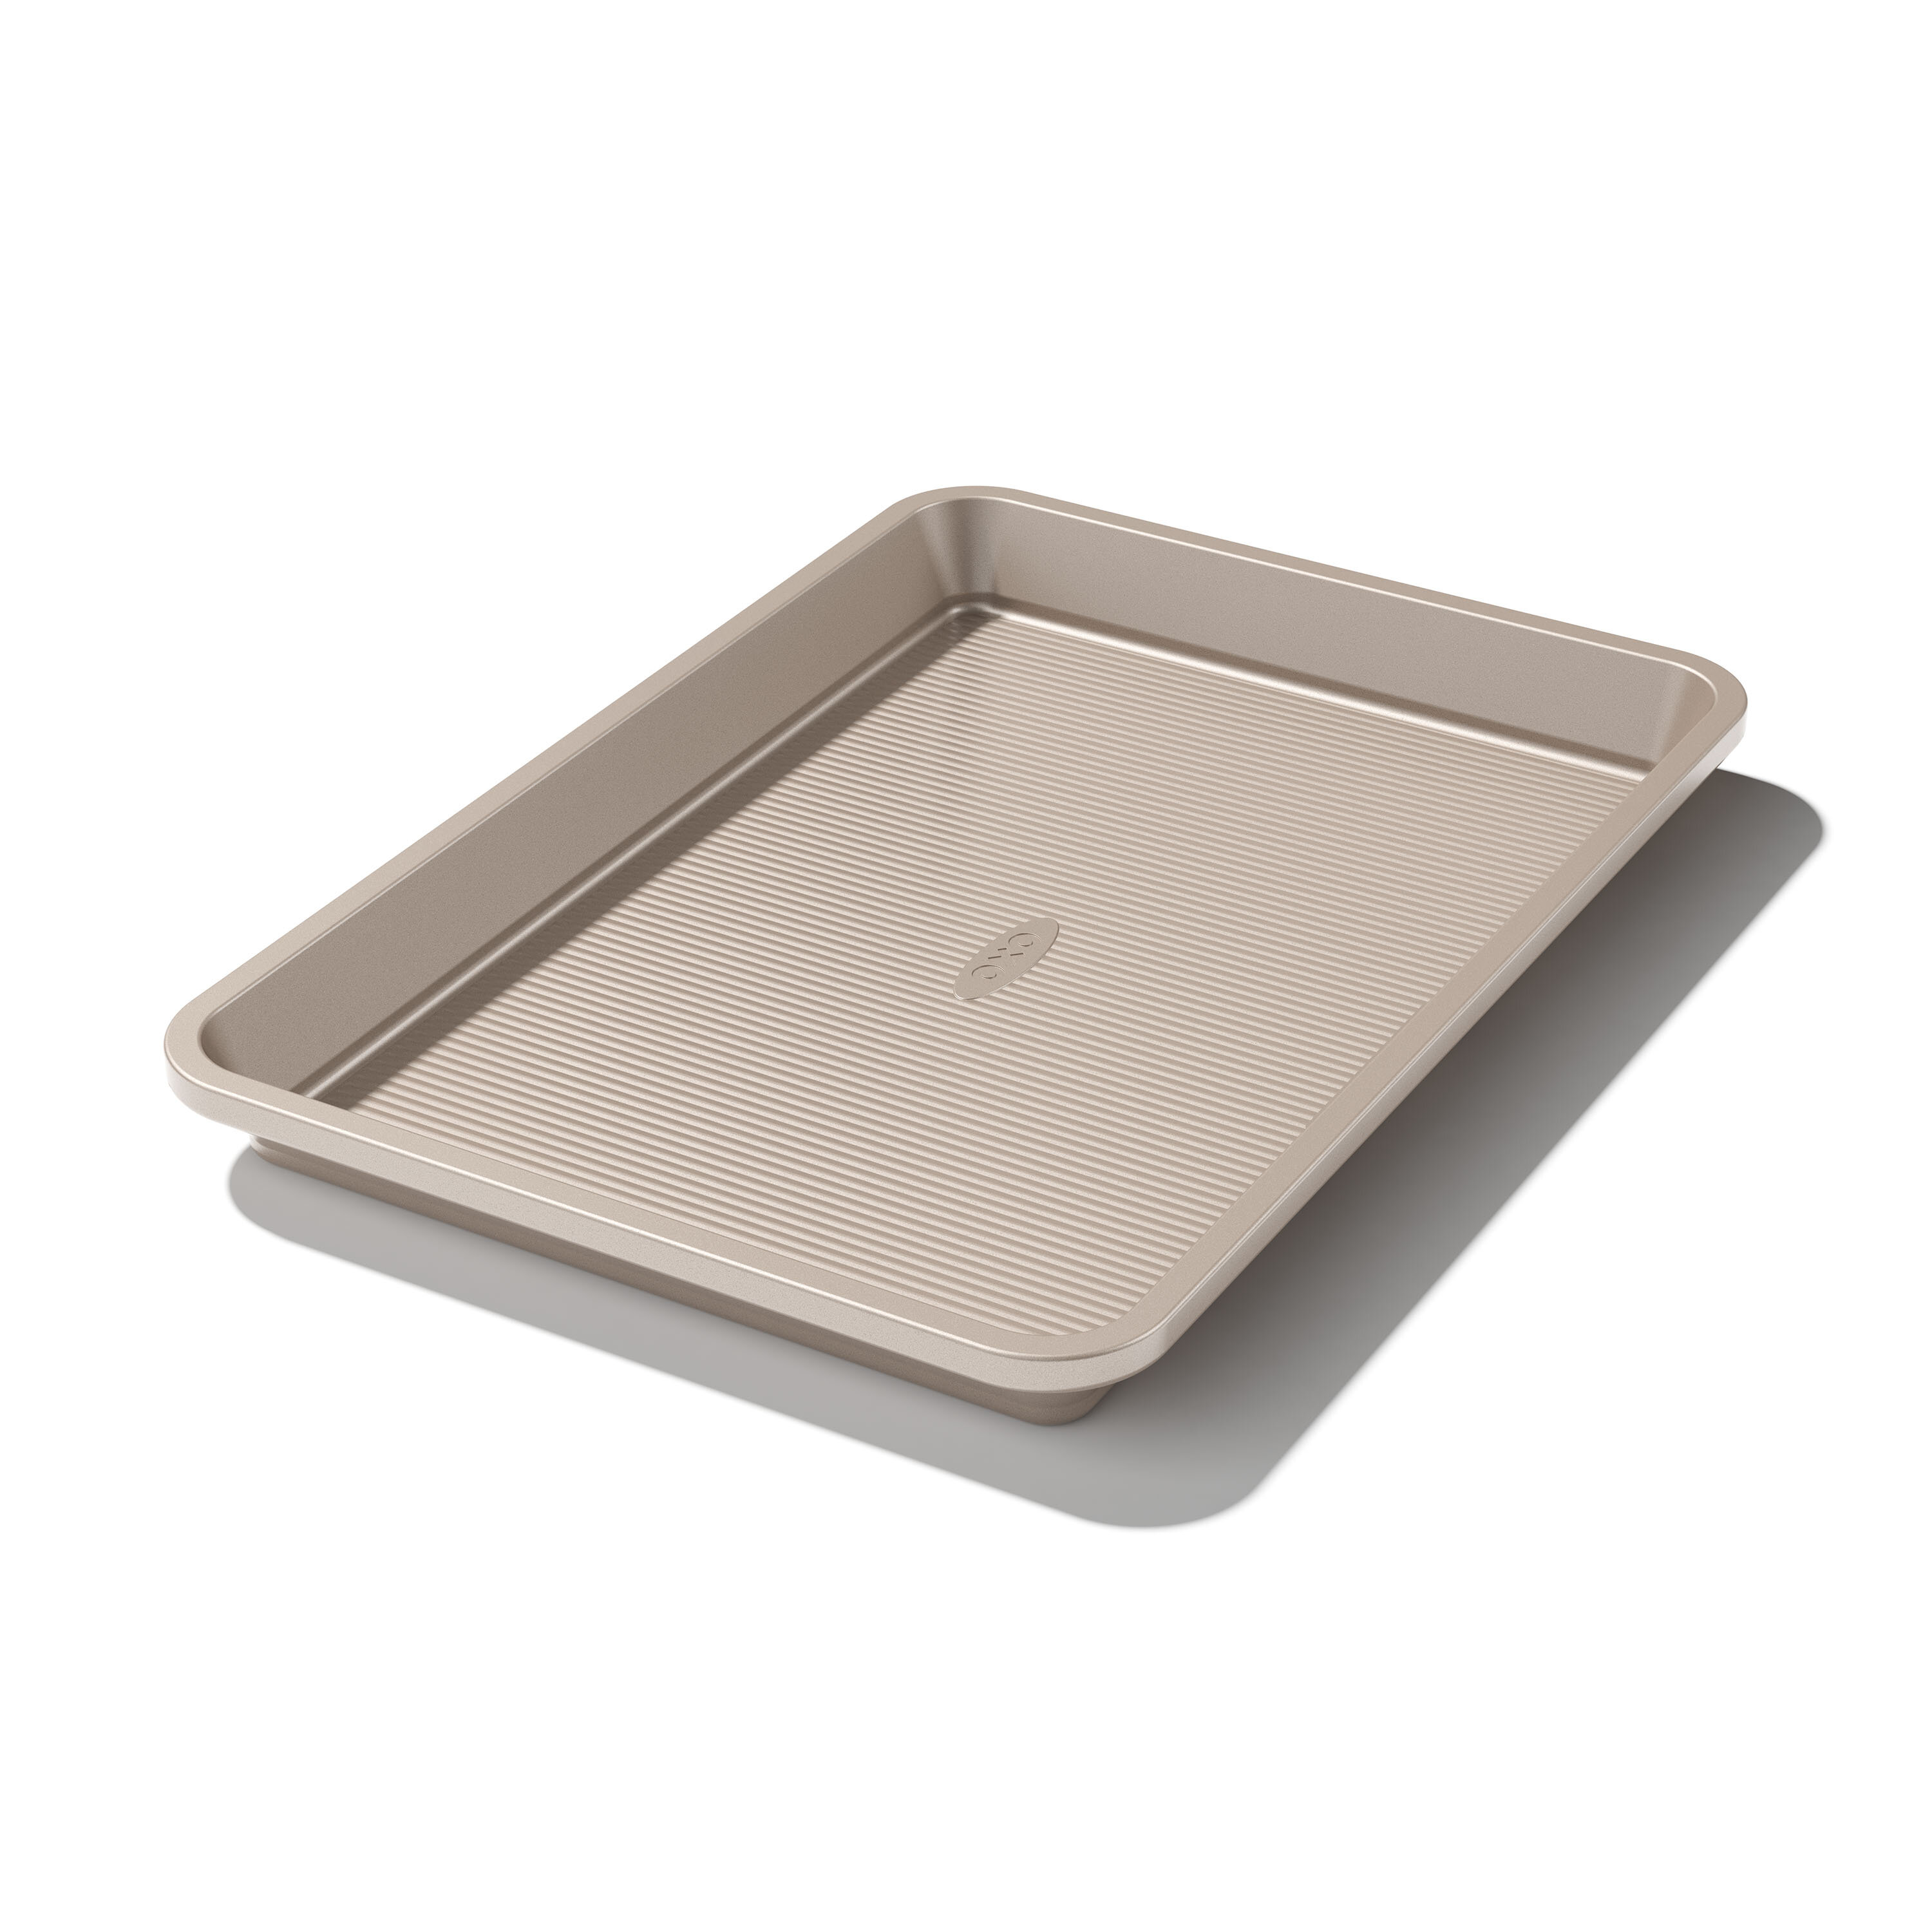 All-Clad Nonstick Pro-Release Jelly Roll Pan